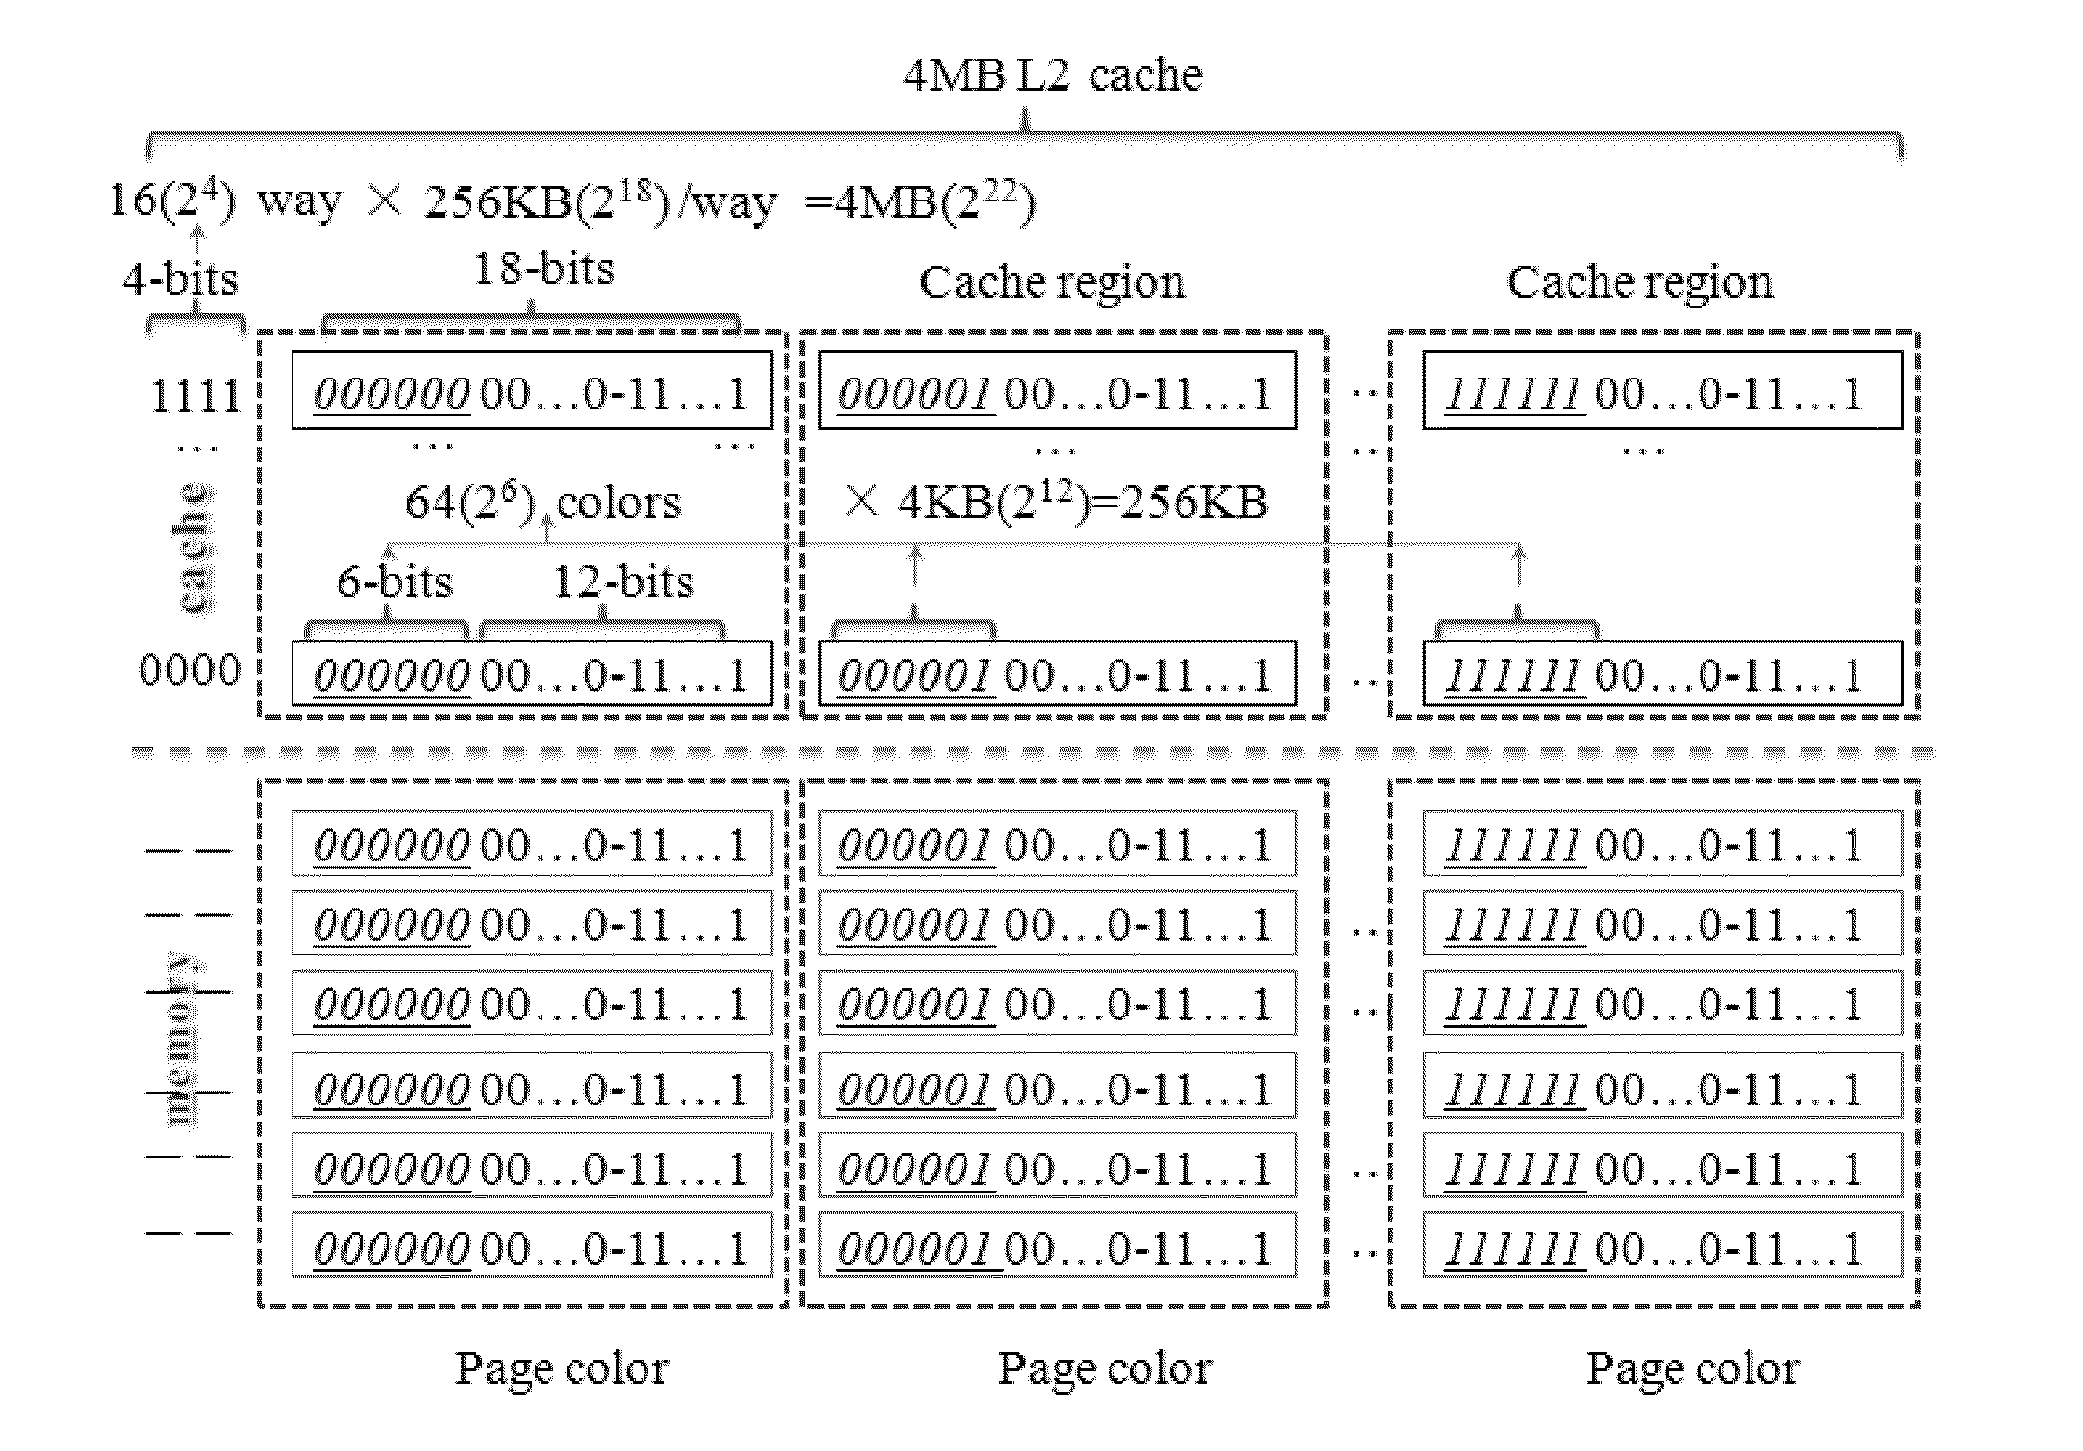 Access Optimization Method for Main Memory Database Based on Page-Coloring